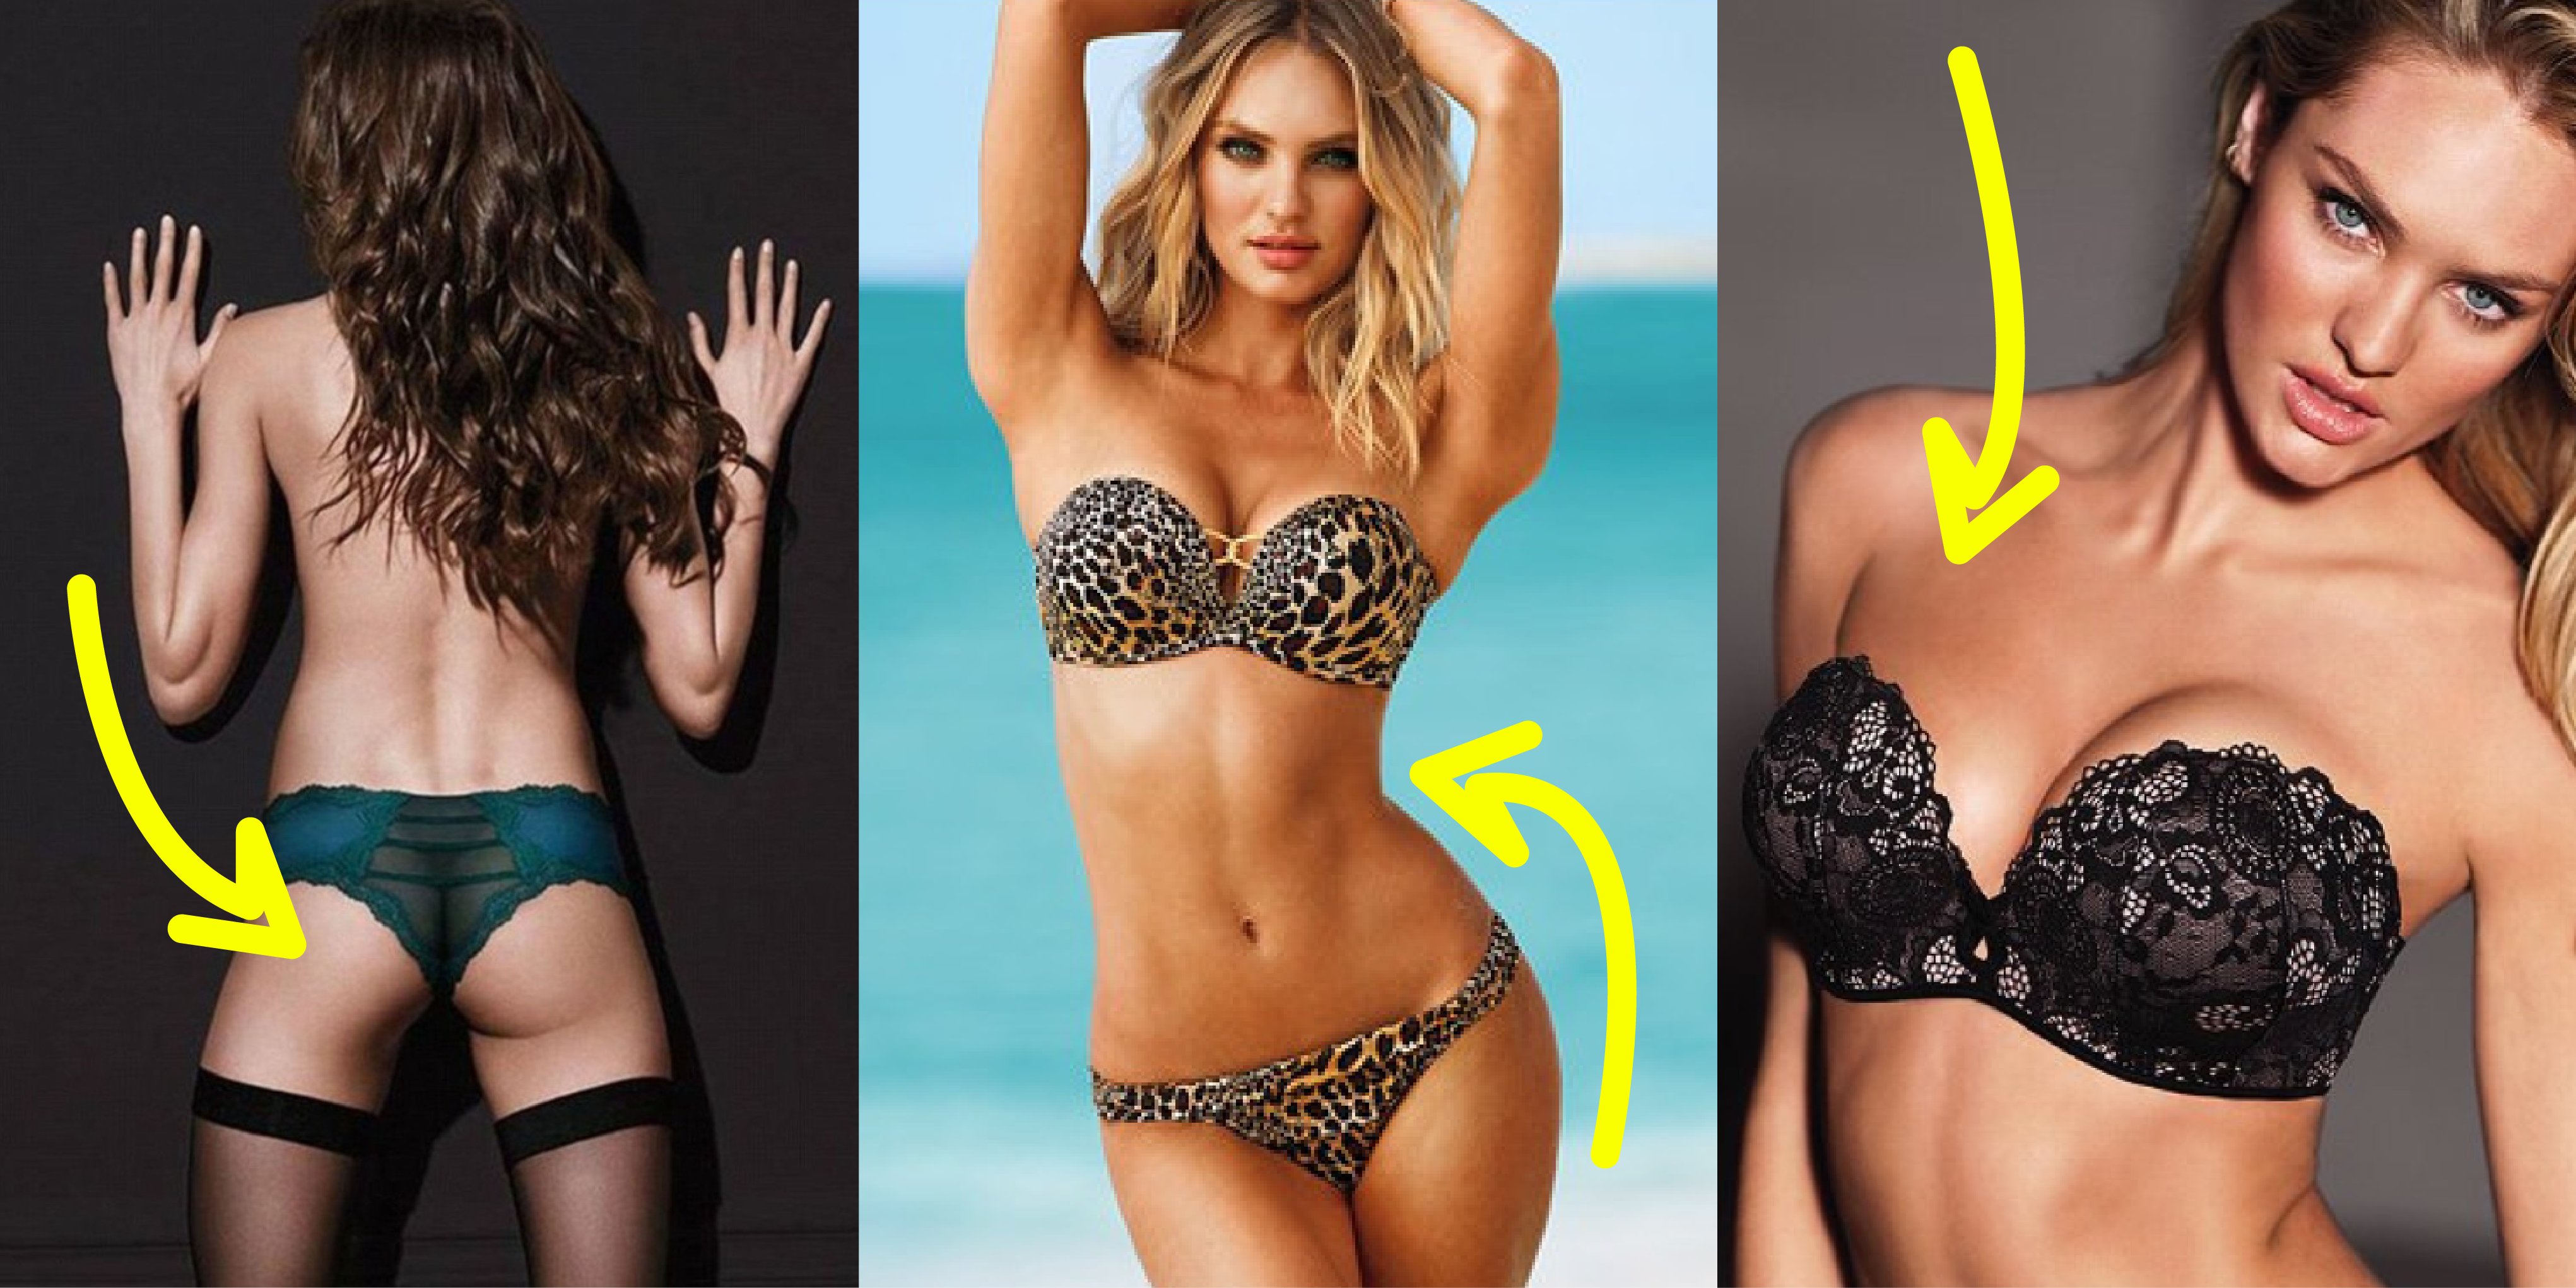 Cosmopolitan X:ssä: What Victoria's Secret models look like in swimsuits  WITHOUT Photoshop:   / X